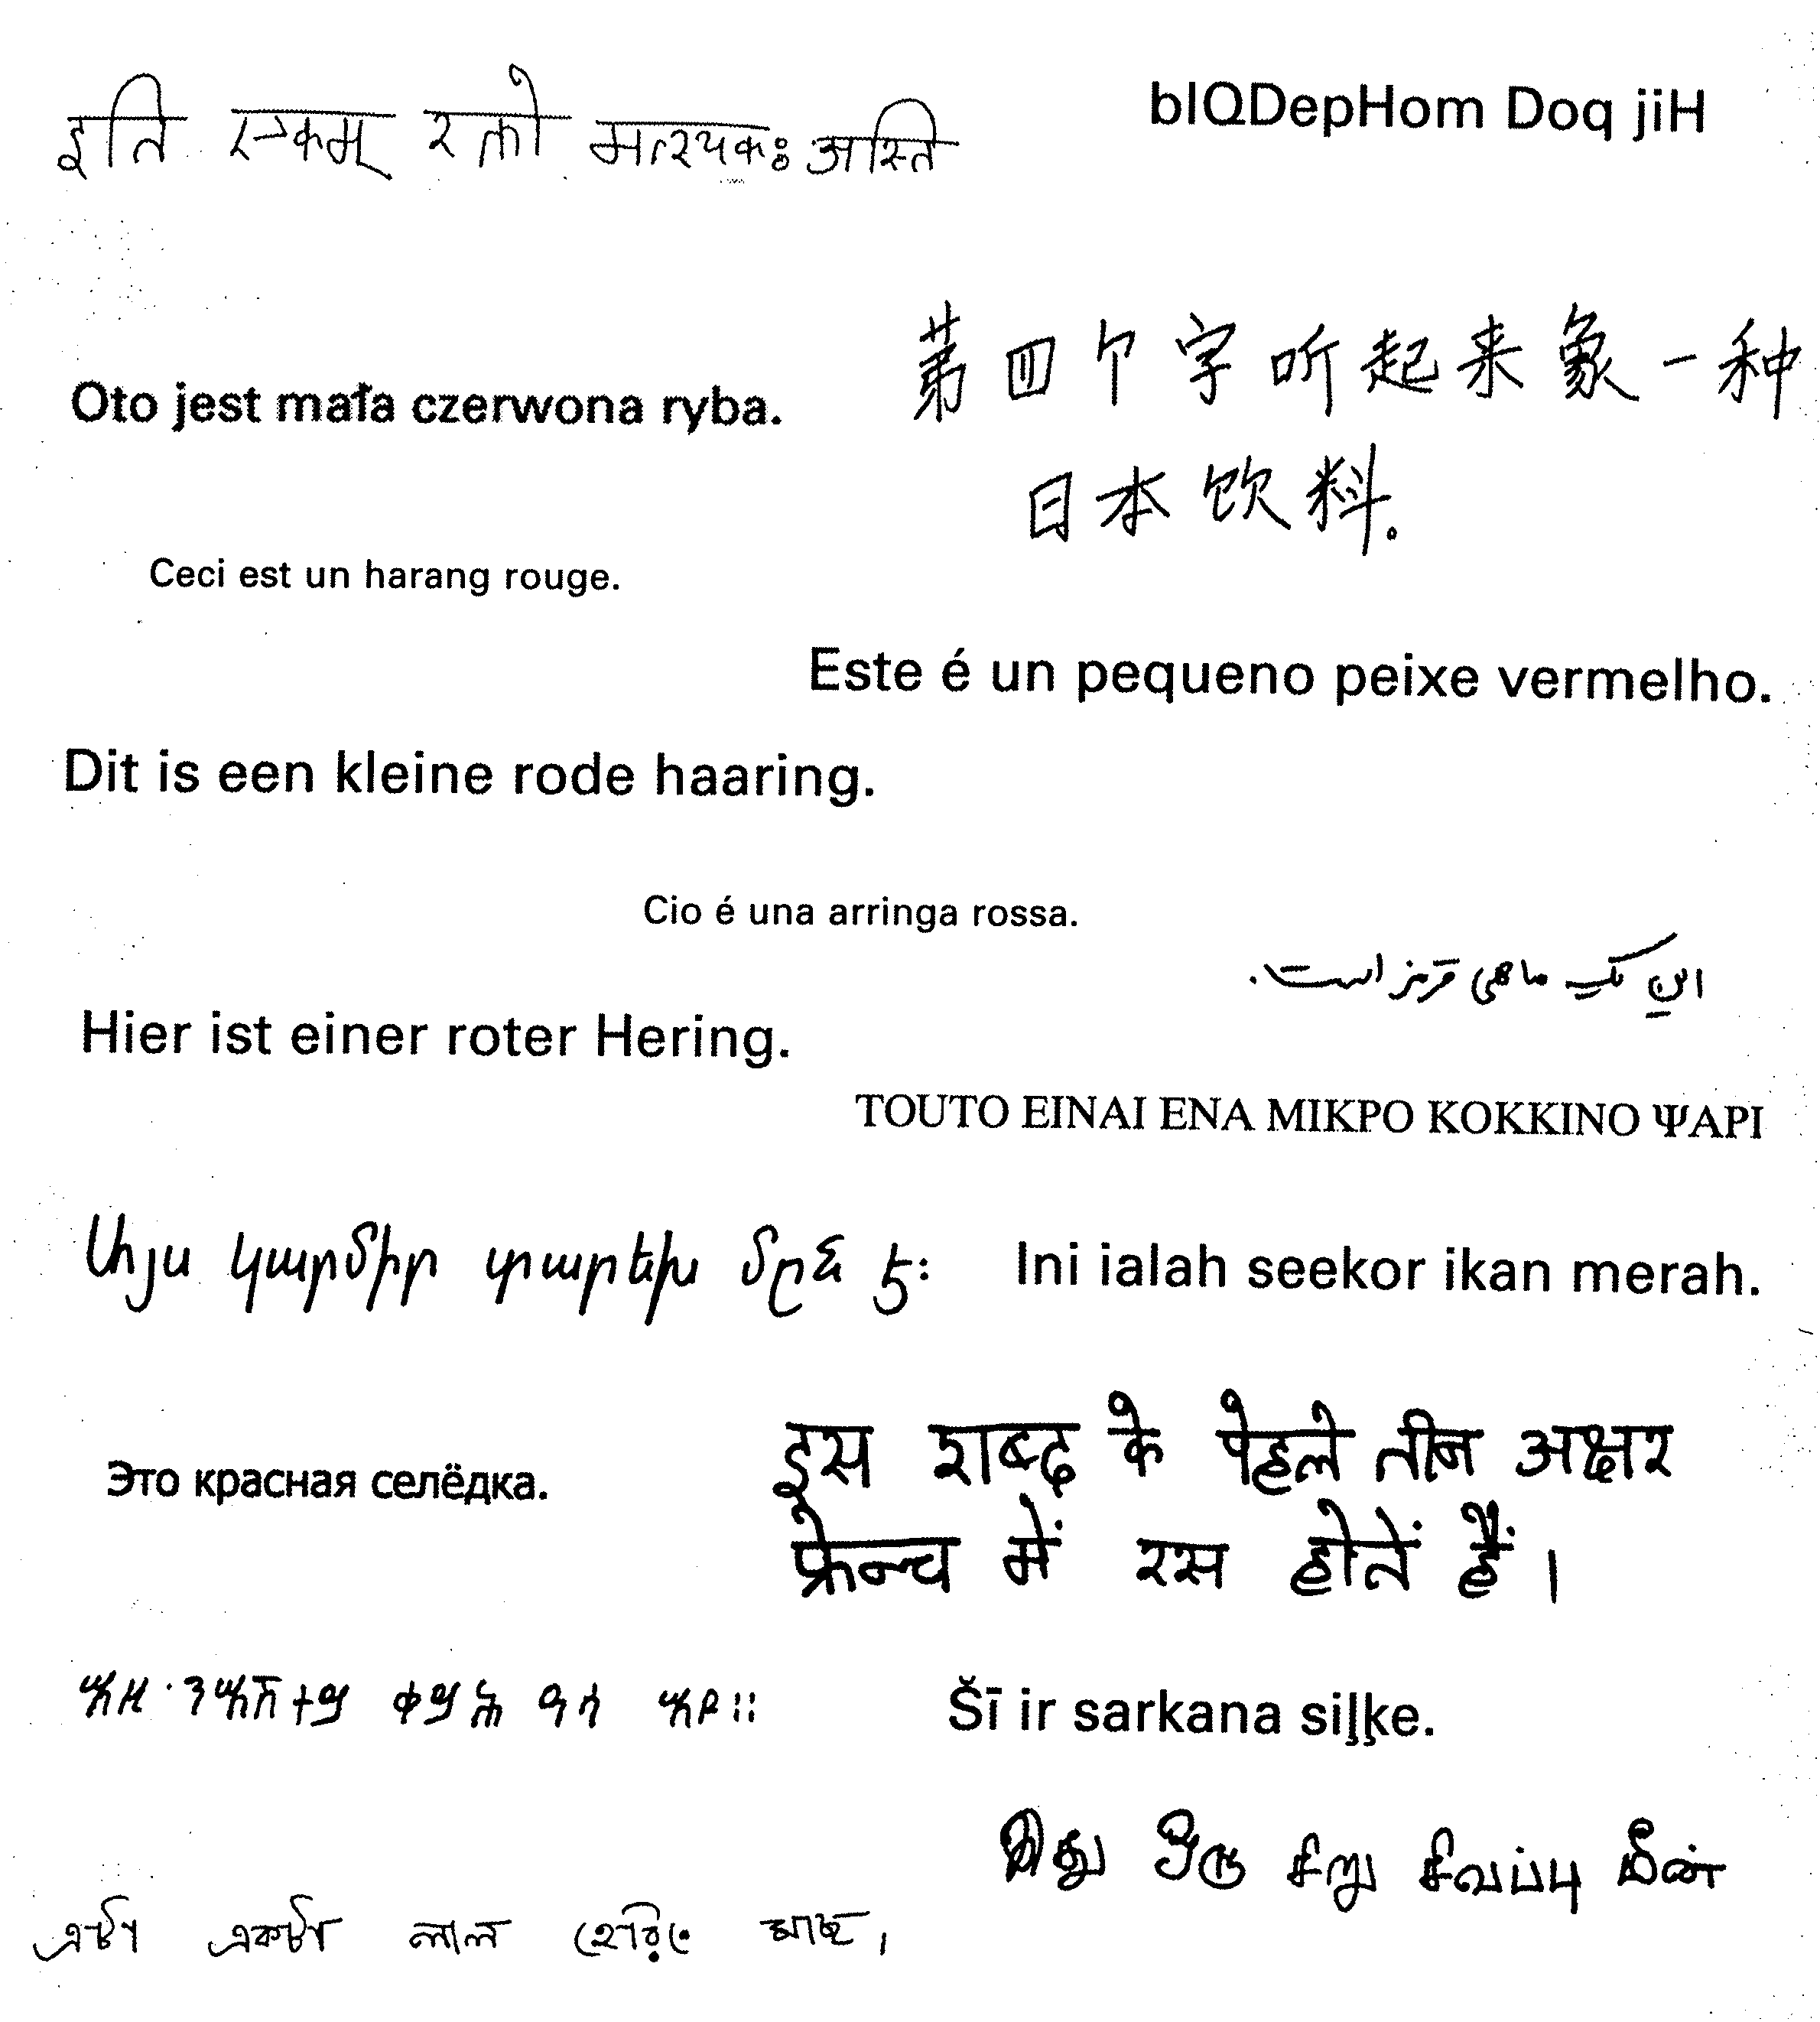 Text in various languages